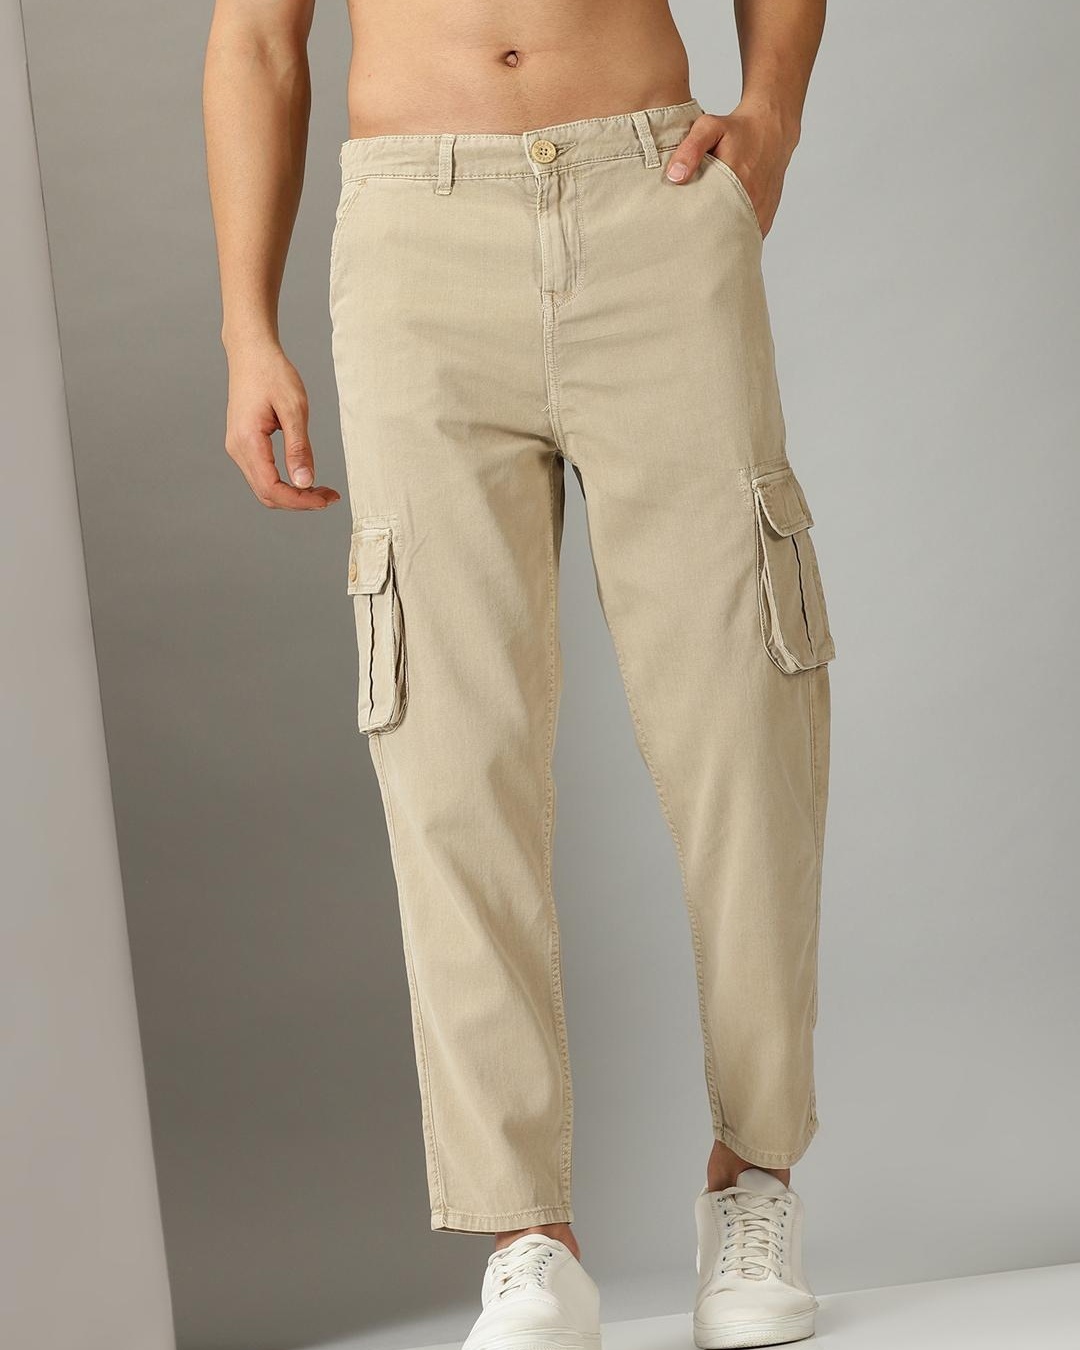 Plain Men Cotton Cargo Pants, Loose Fit, Casual wear at Rs 220/piece in  Kolkata